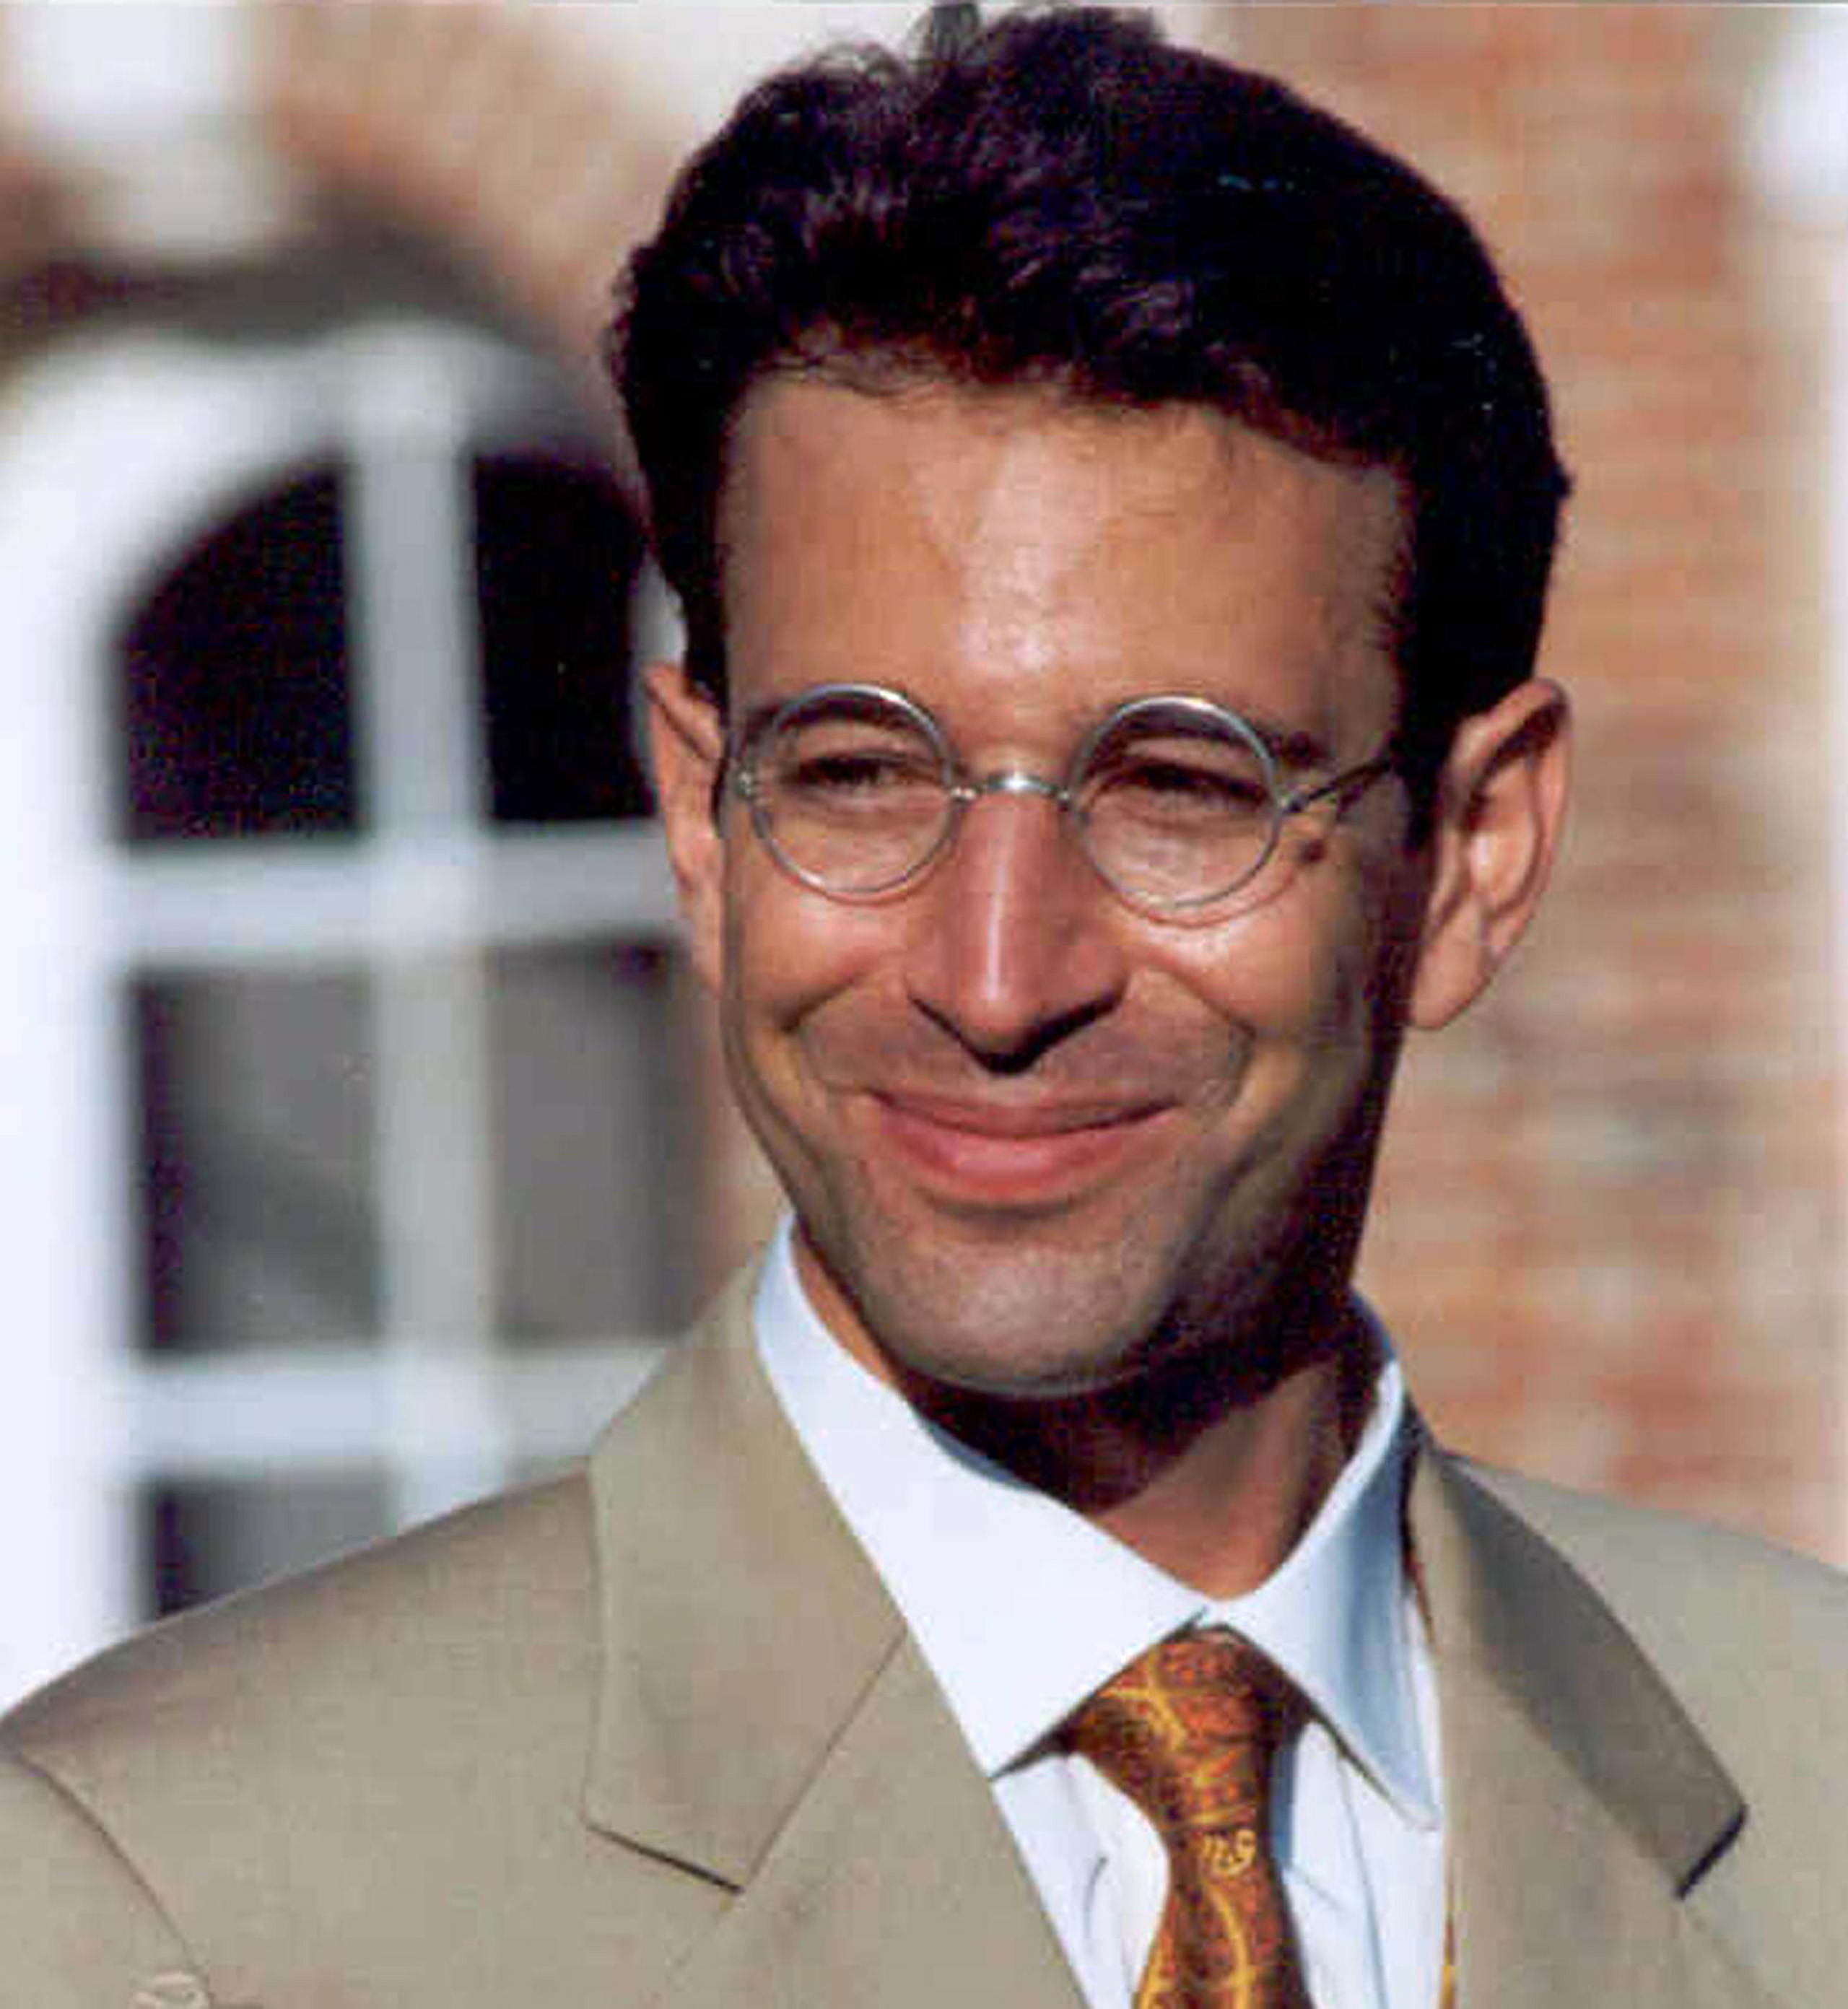 Wall Street Journal reporter Daniel Pearl disappeared in the Pakistani port city of Karachi on Jan 23, 2002 after telling his wife he was going to interview an Islamic group leader. (AFP/Getty Images)